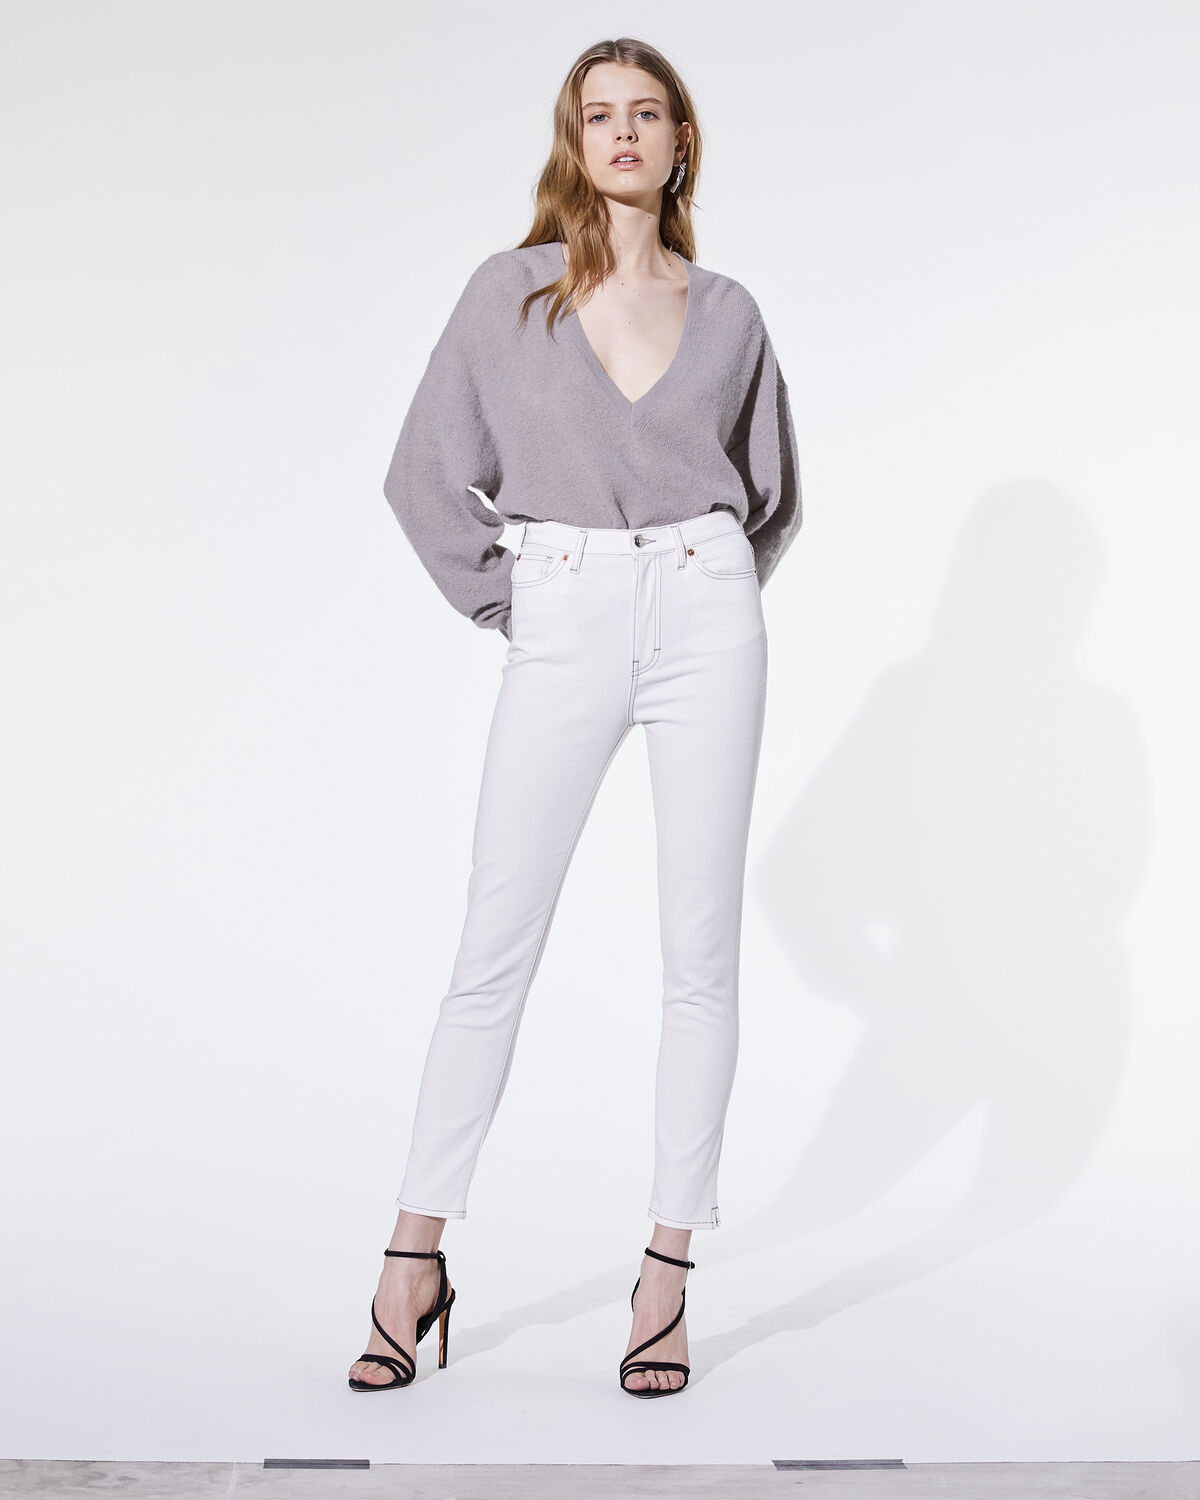 Photo of IRO Paris Ball Sweater Mixed Grey - With Its V-neck Neckline, This Thin Sweater Will Be Perfect For The Season. Combine This Basic With White High Waist Pants For A Bright Look, Or Jeans For A More Casual Look. Fall Winter 19